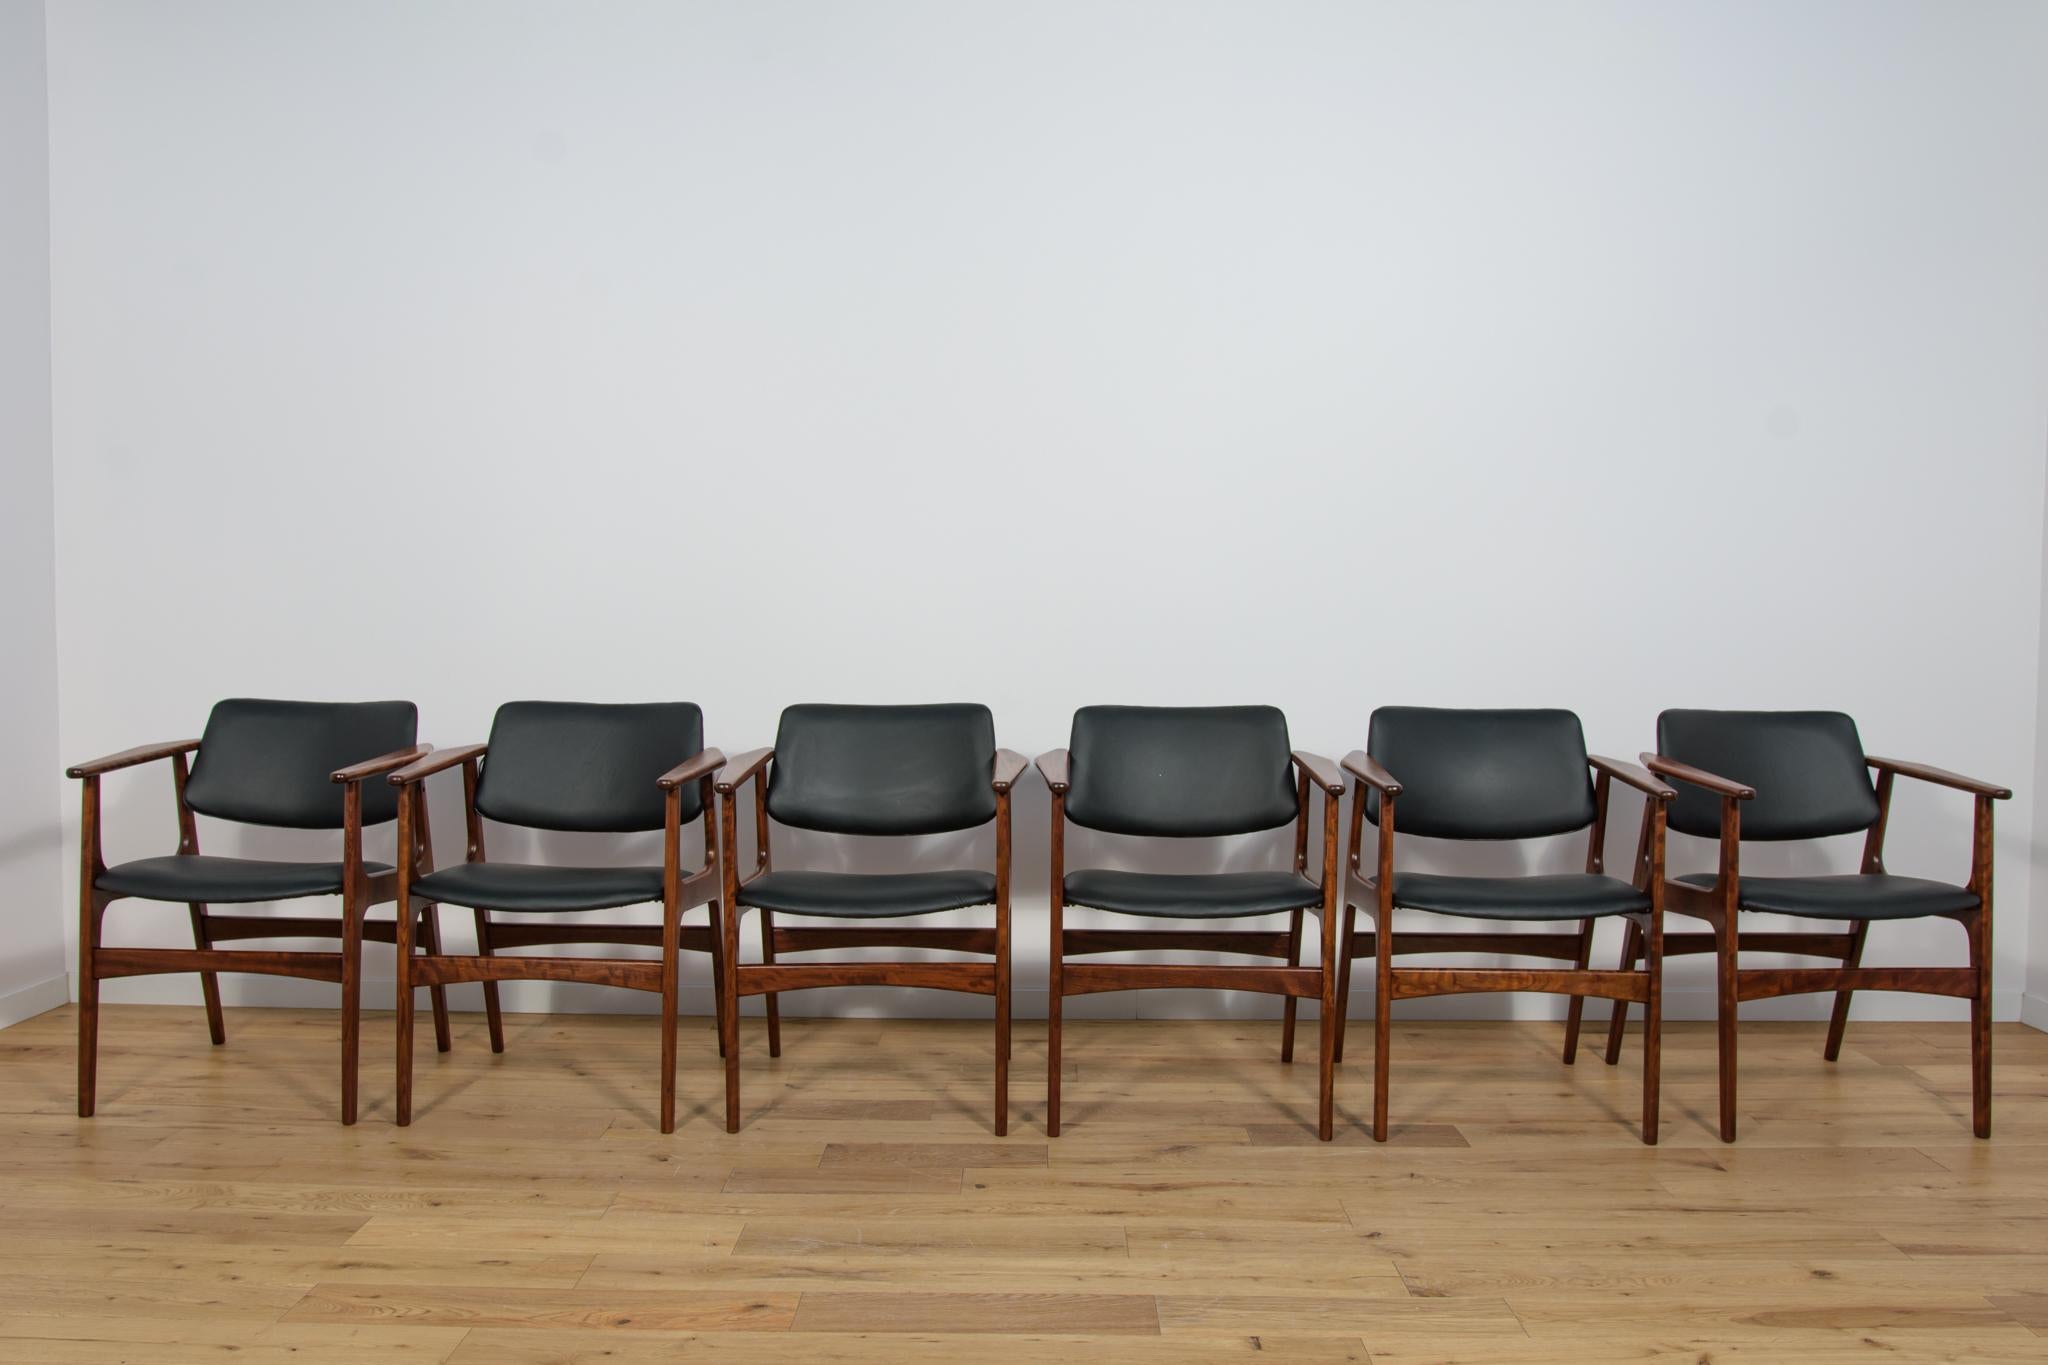 Set of 6 armchairs designed by Arne Vodder. The teak elements have been cleaned of old surfaces and finished with Danish oil. The upholstery elements have been changed and covered with a new black natural leather.